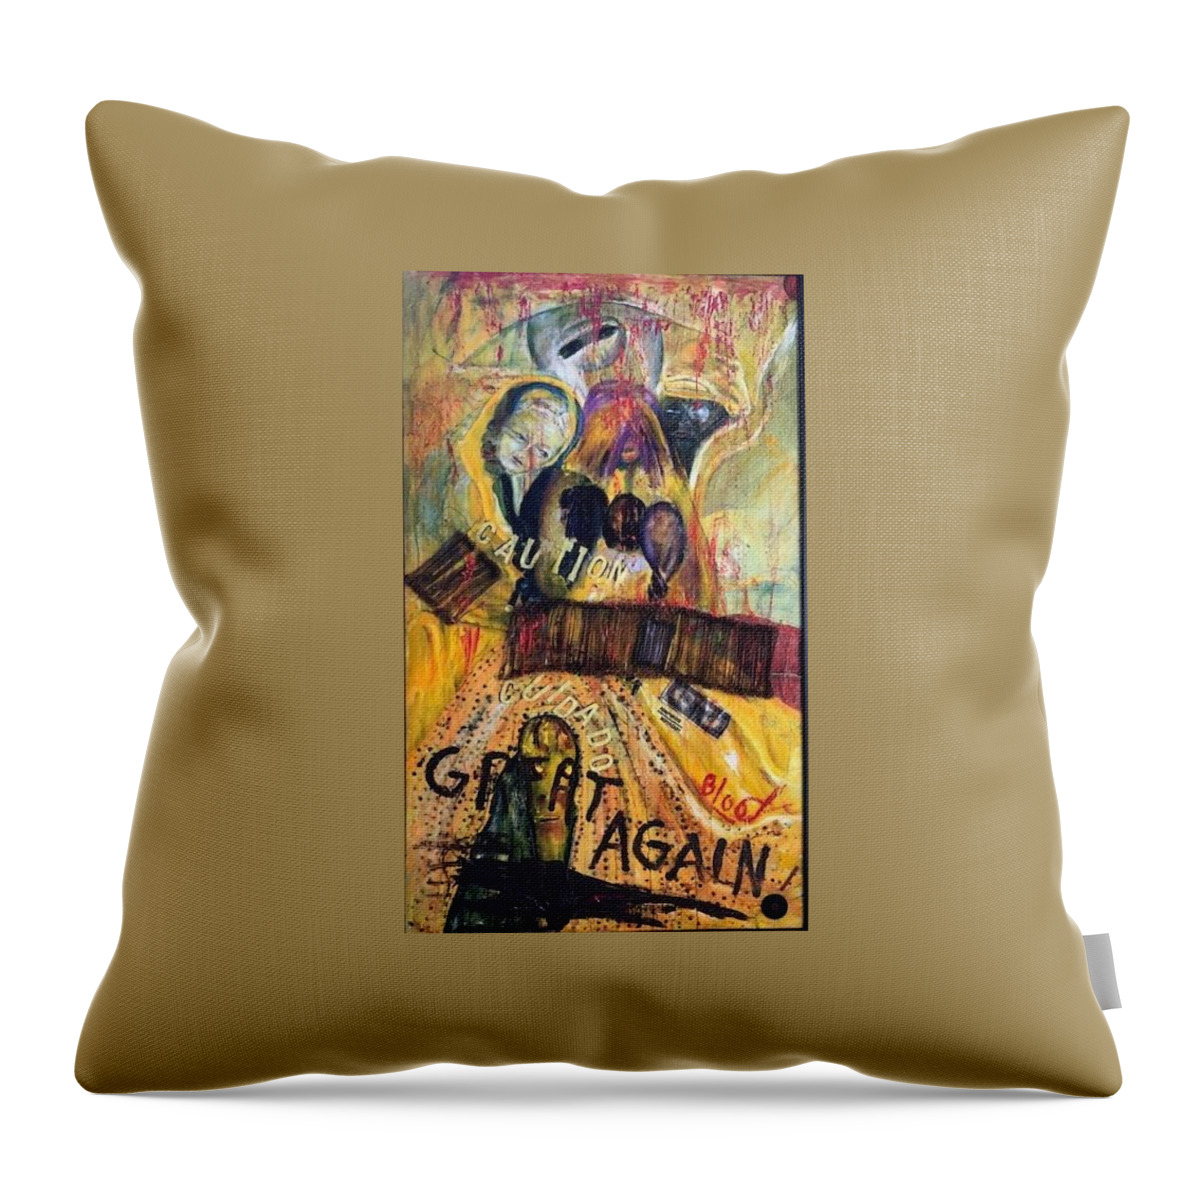 Border Wall Throw Pillow featuring the painting Great Again by Peggy Blood